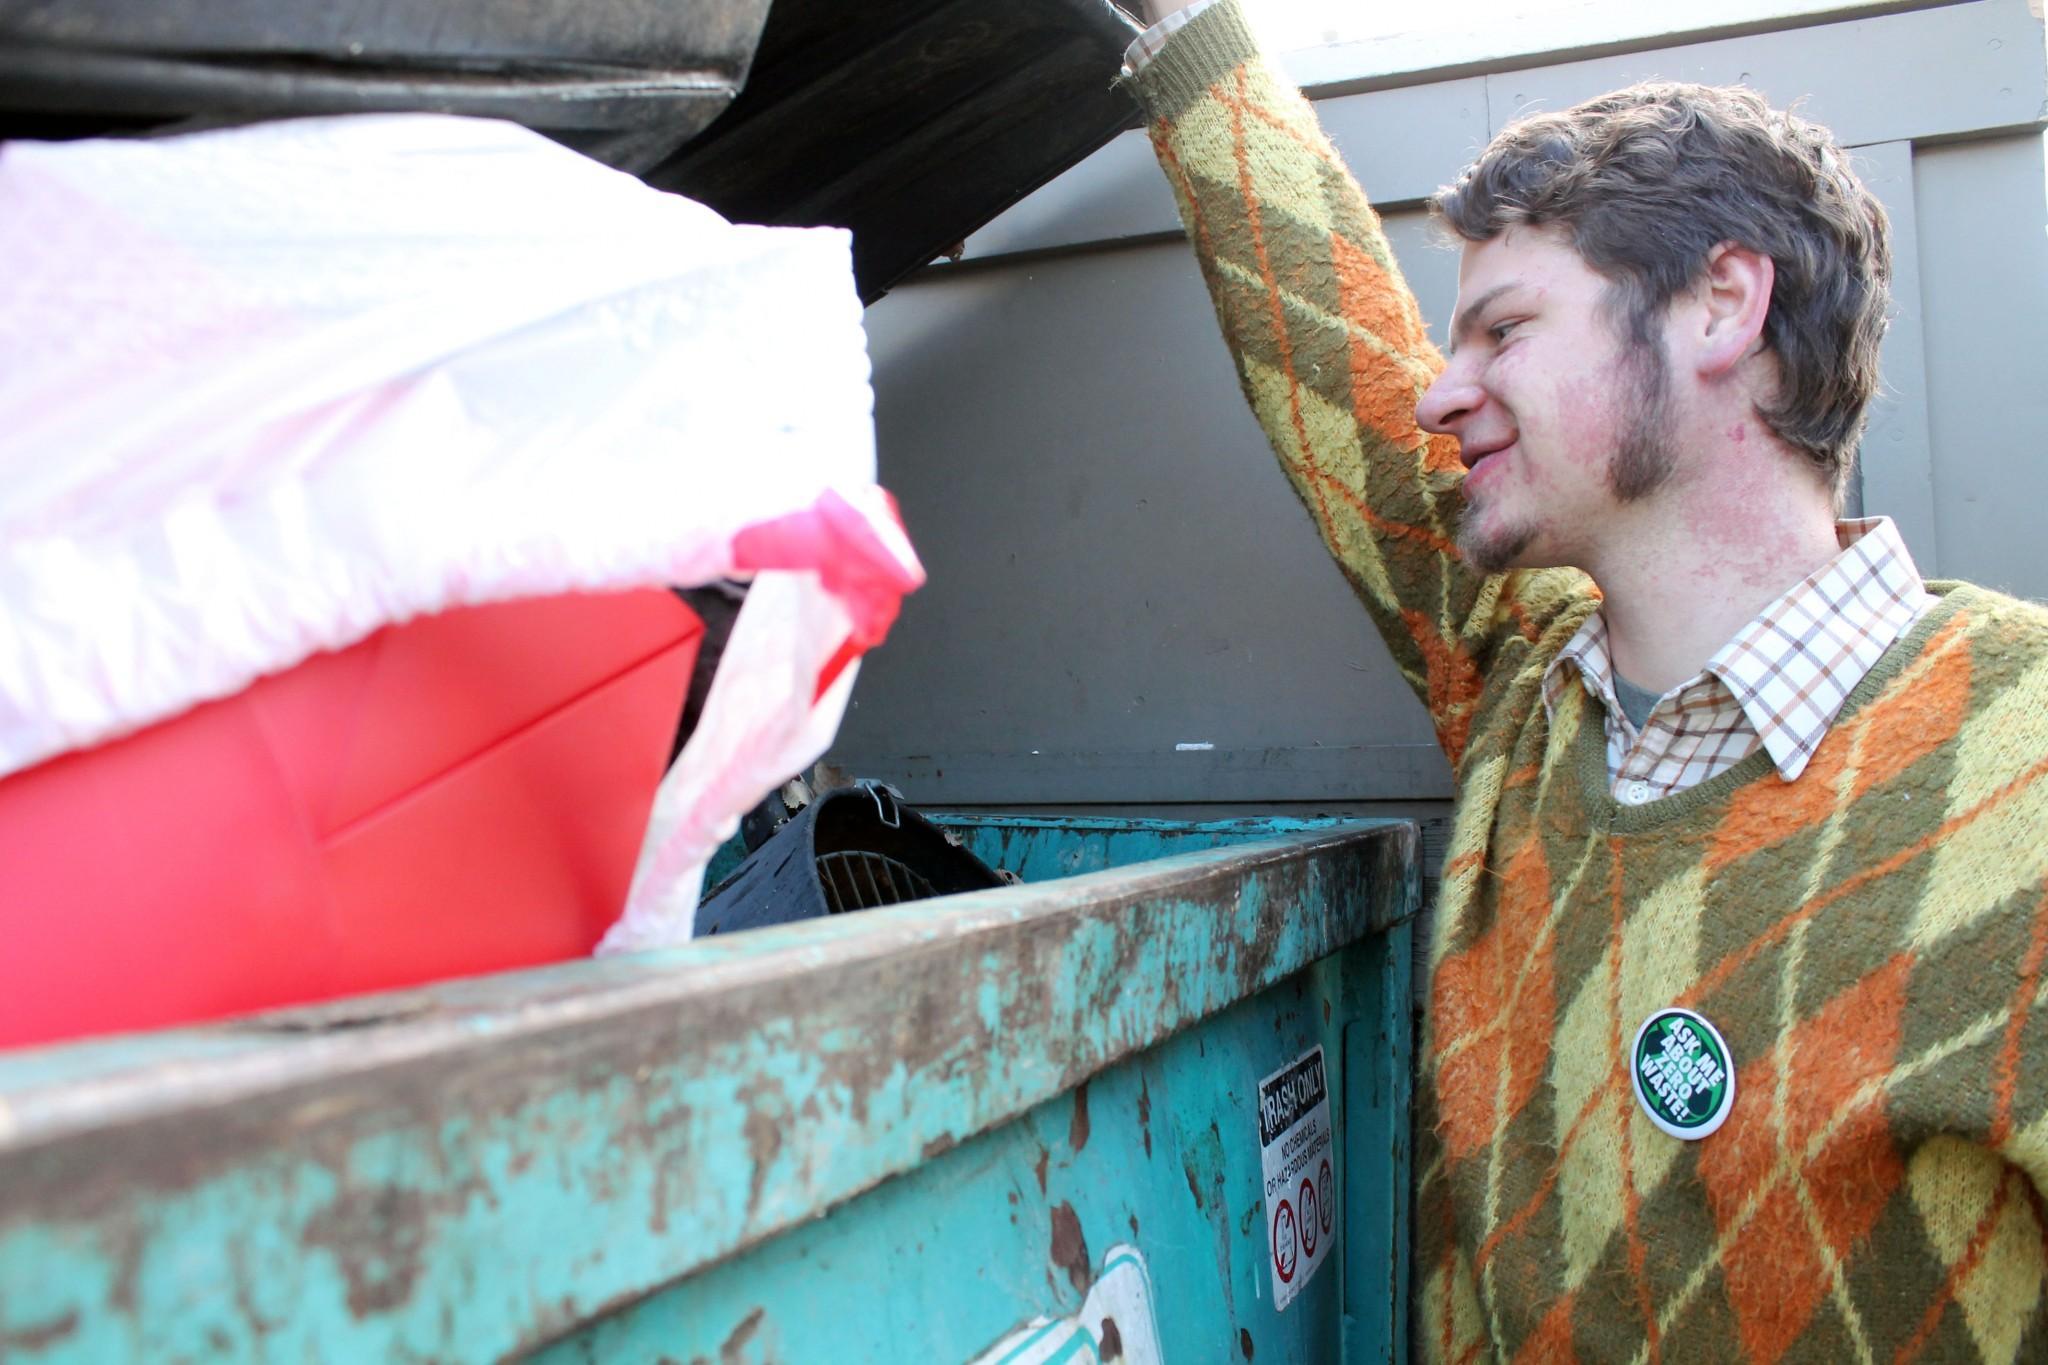 John Rooss, a soil and crop science major and organic agriculture minor, spots what will soon be his new fire pit in his neighborhood dumpster.  According to Rooss, in addition to using his findings for personal projects he also recycles and composts items that he finds.